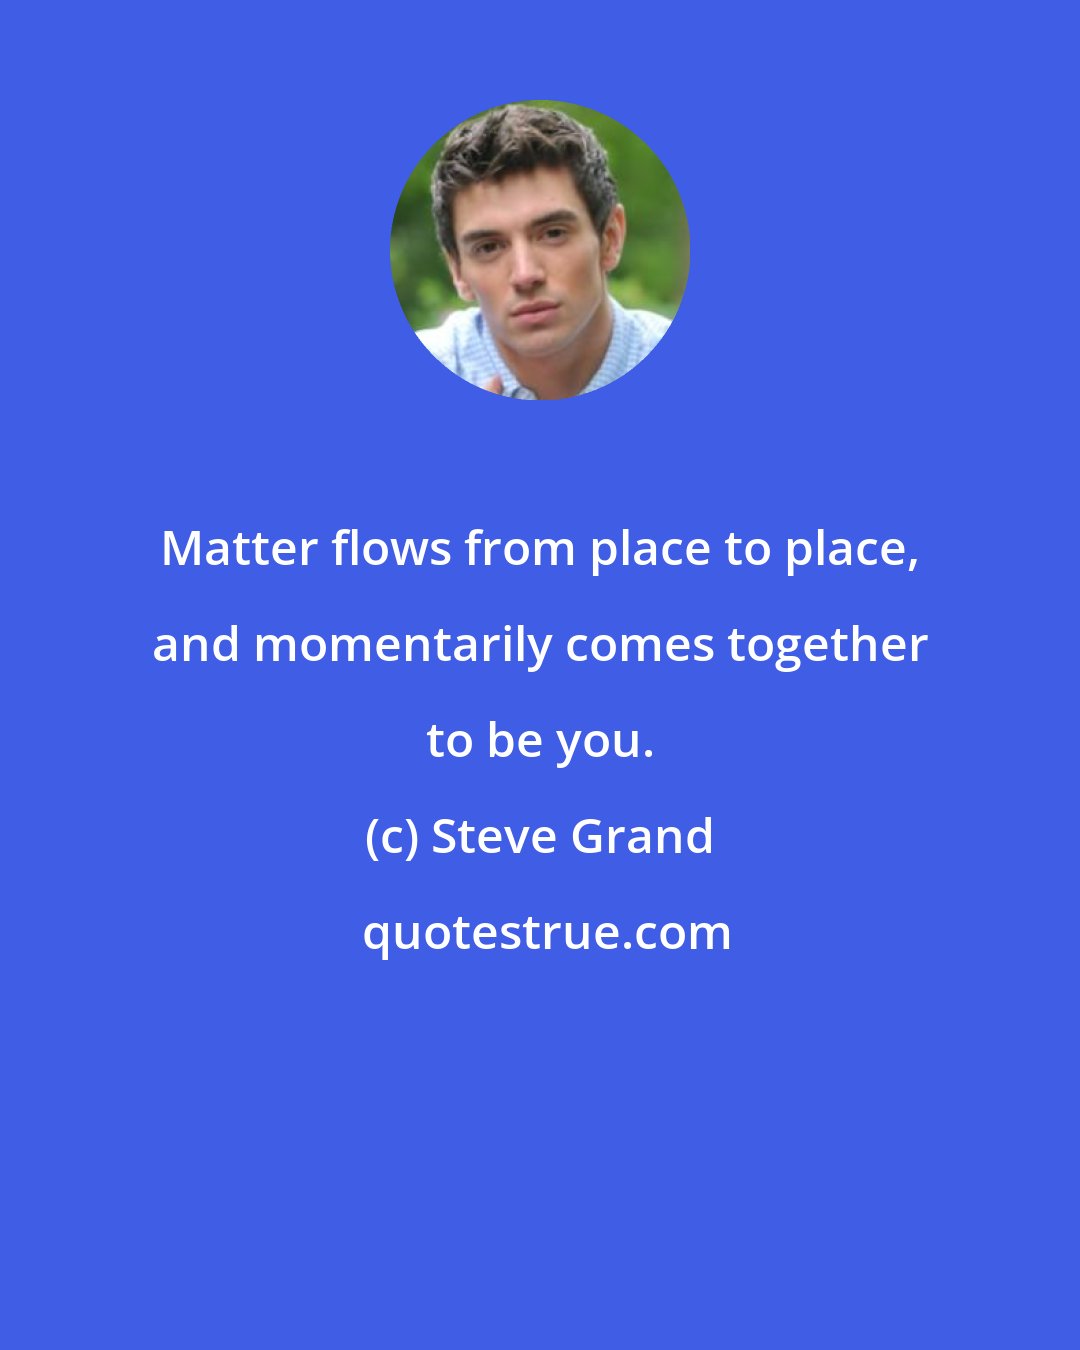 Steve Grand: Matter flows from place to place, and momentarily comes together to be you.